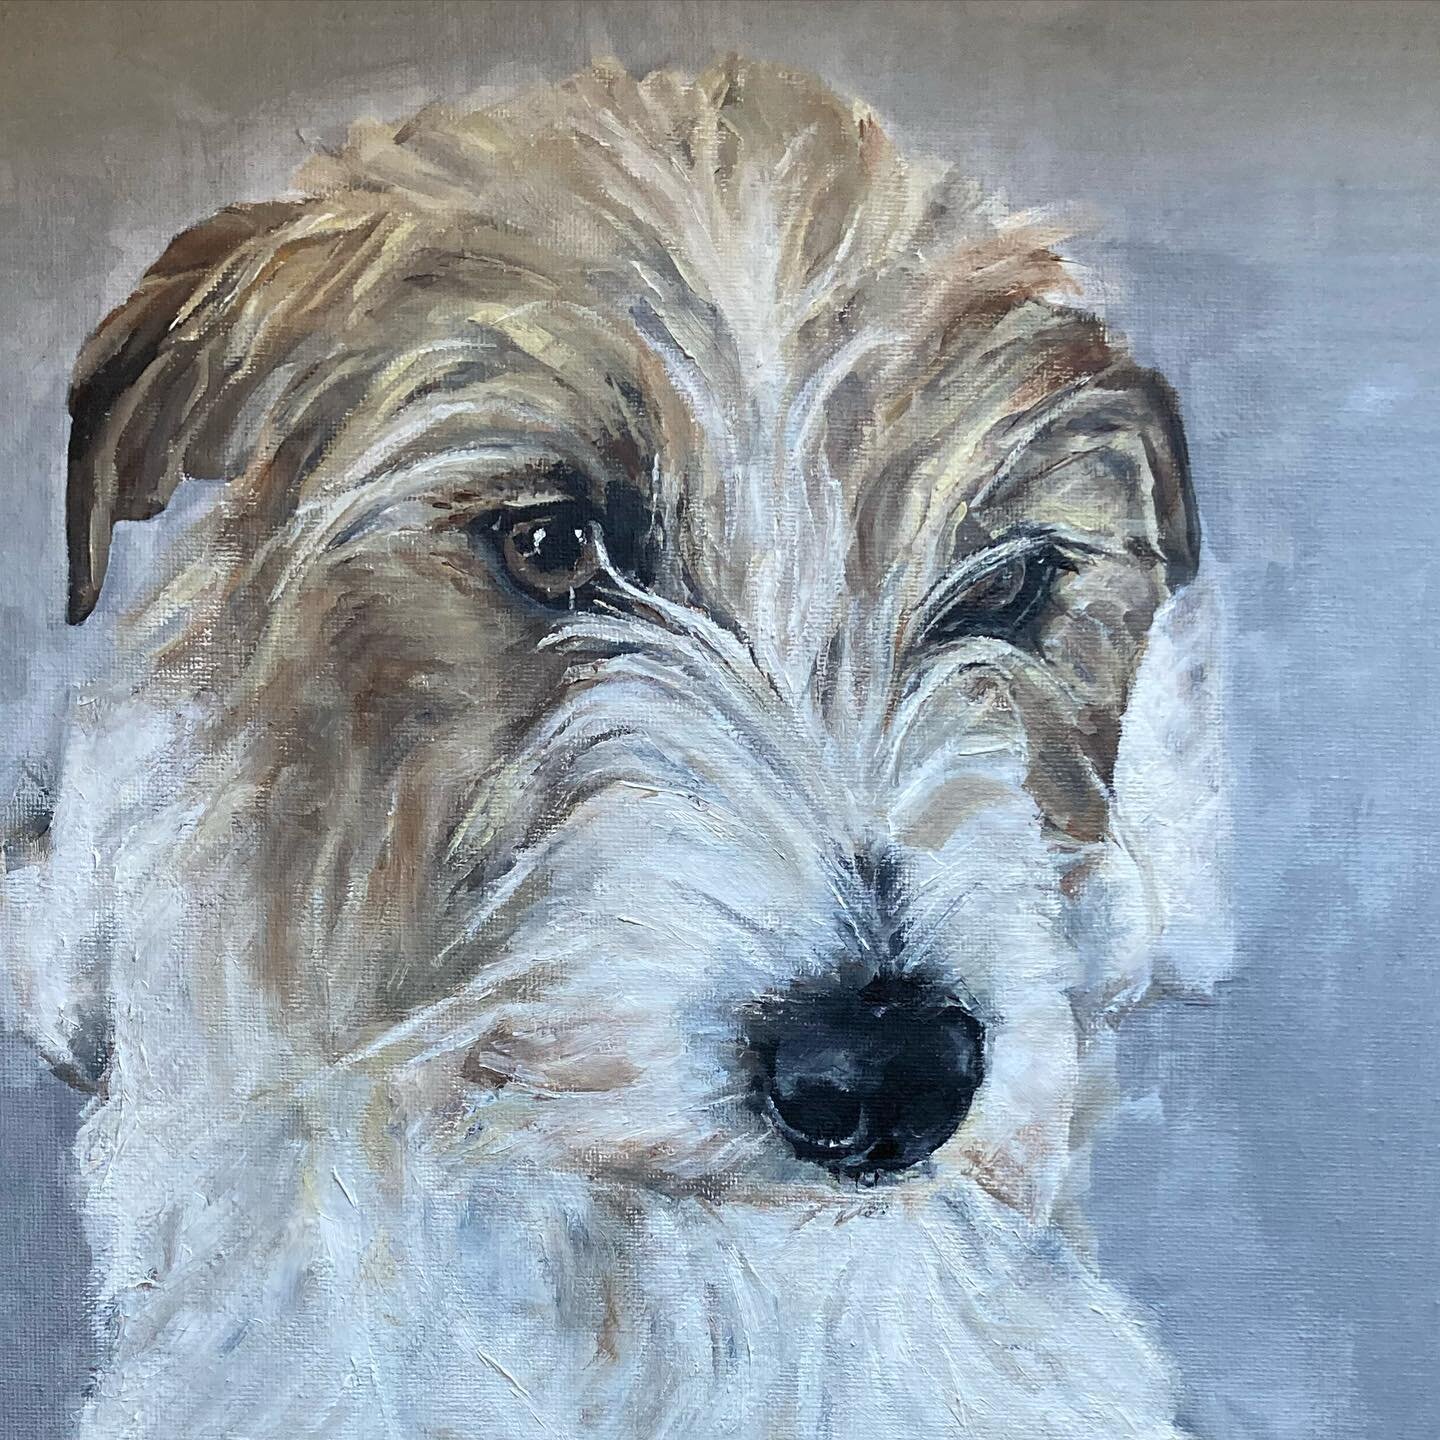 Patch&rsquo;s early arrival meant that I didn&rsquo;t quite manage to finish Maggie&rsquo;s painting before he arrived but it&rsquo;s now done and ready for the framers, pwew! I adore a scruffy terrier. Scroll ➡️ to see the full picture&hellip;

http